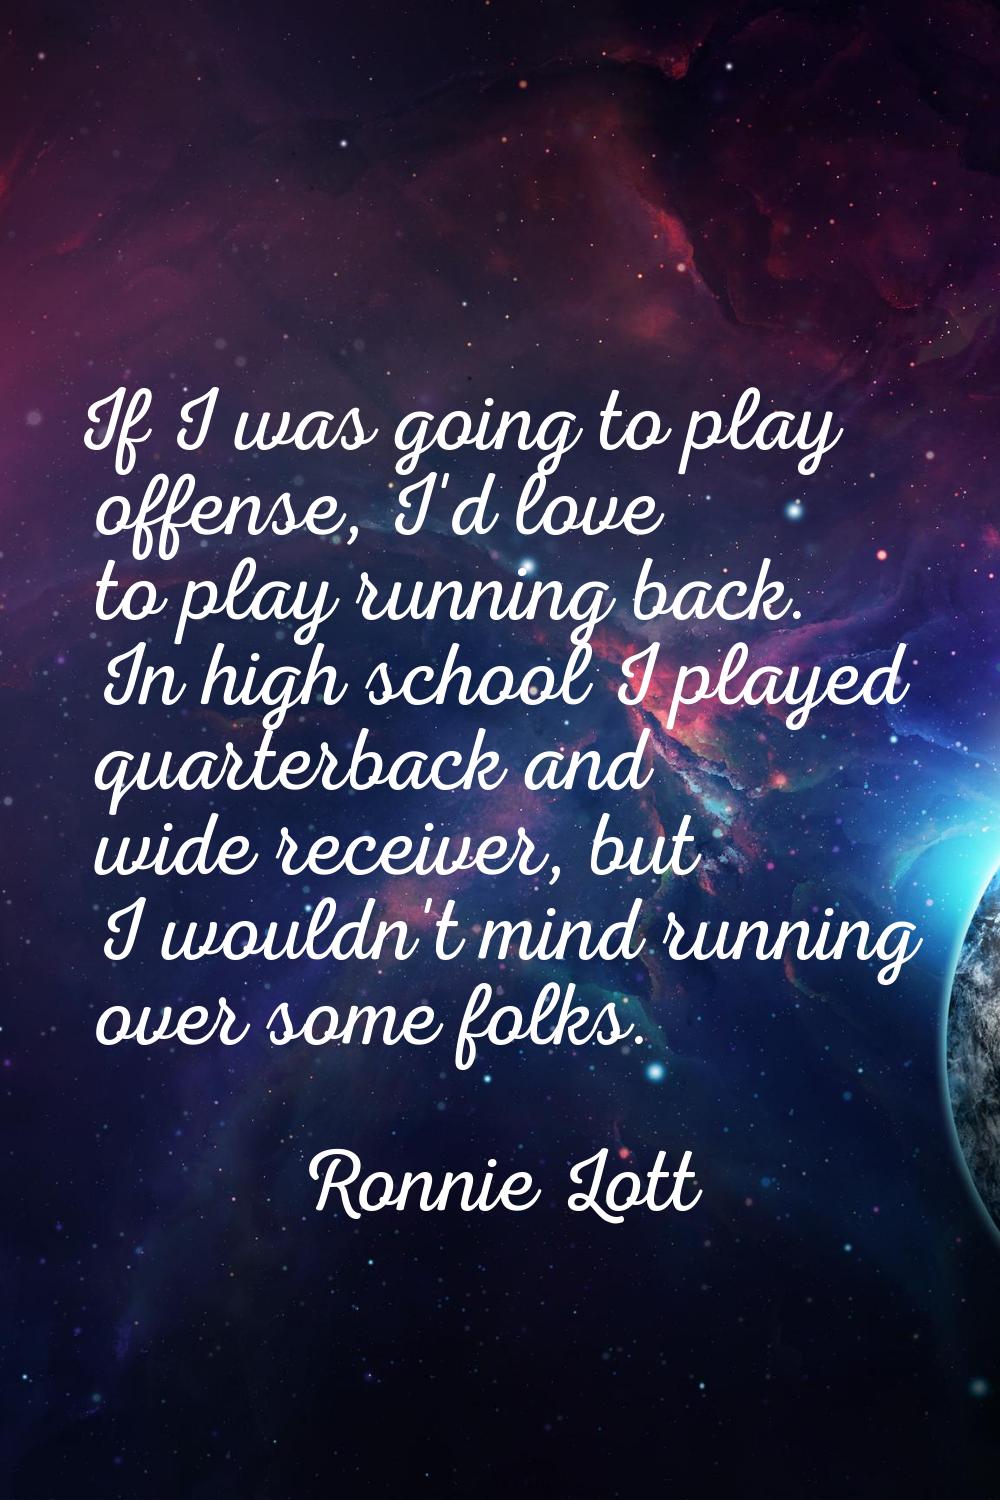 If I was going to play offense, I'd love to play running back. In high school I played quarterback 